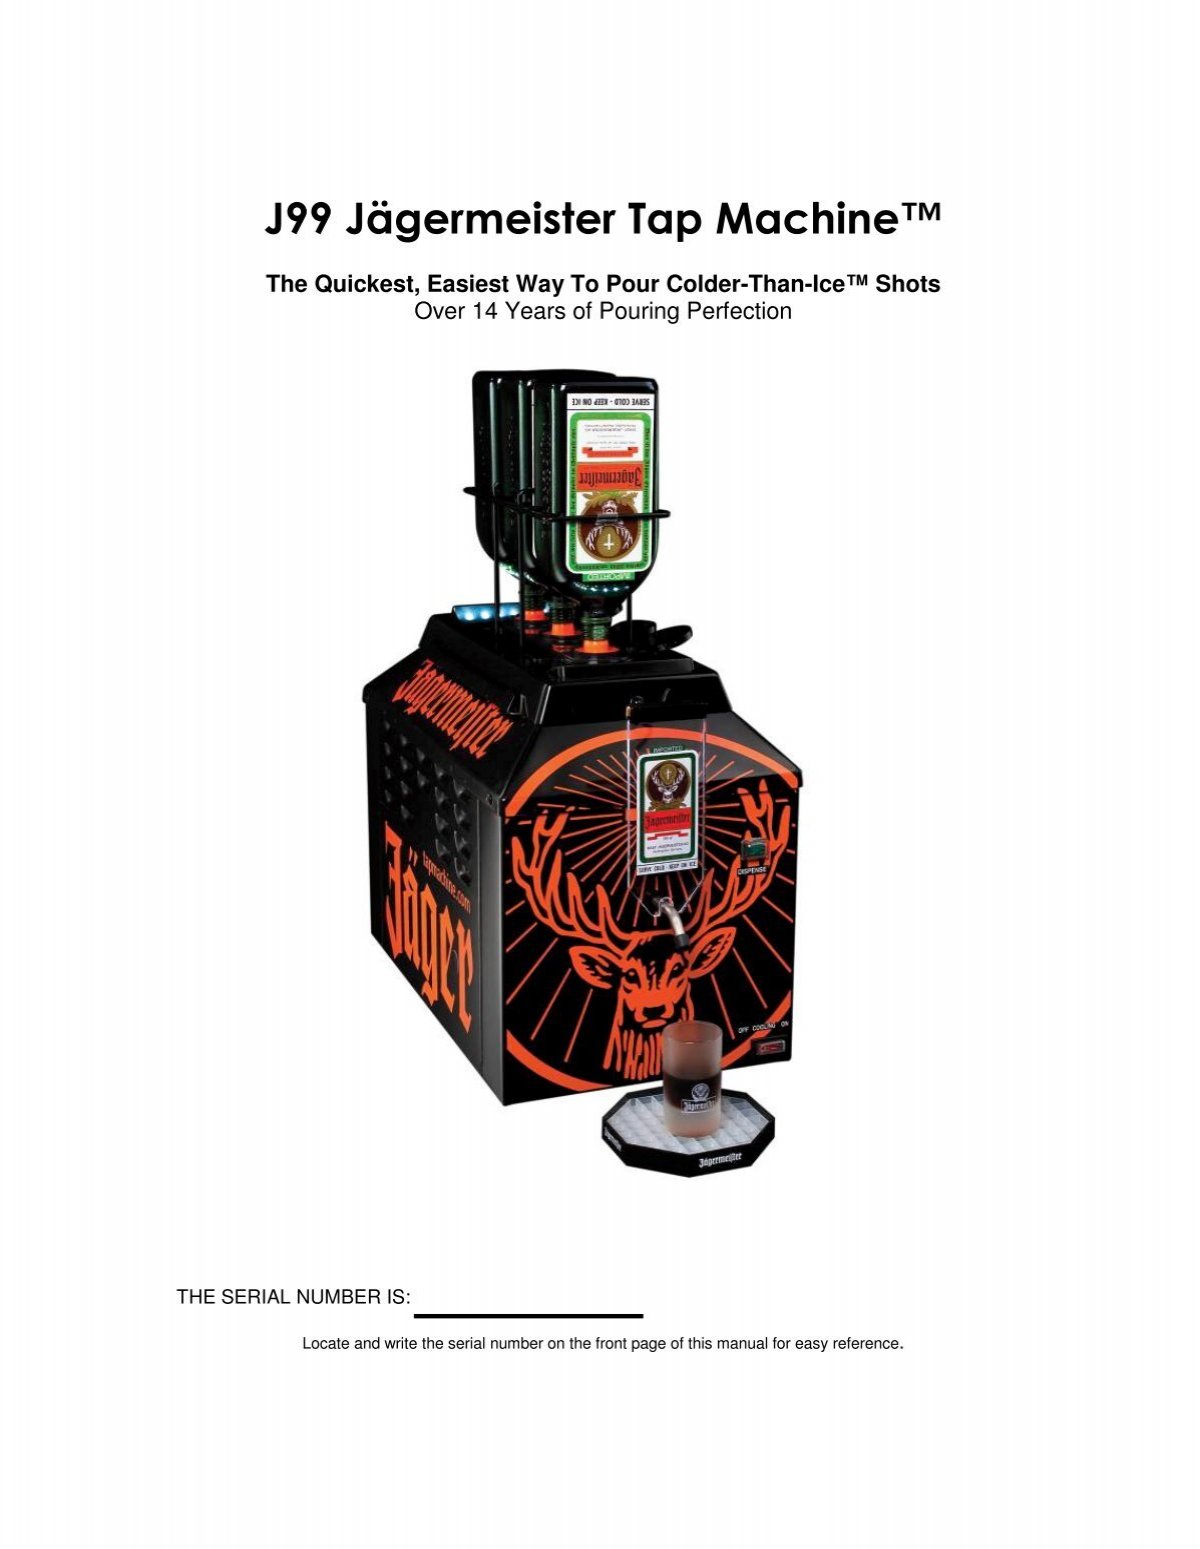 Jagermeister Tap Machine 3 Bottle Ice Cold Shots Model J99 - Tested &  Working 